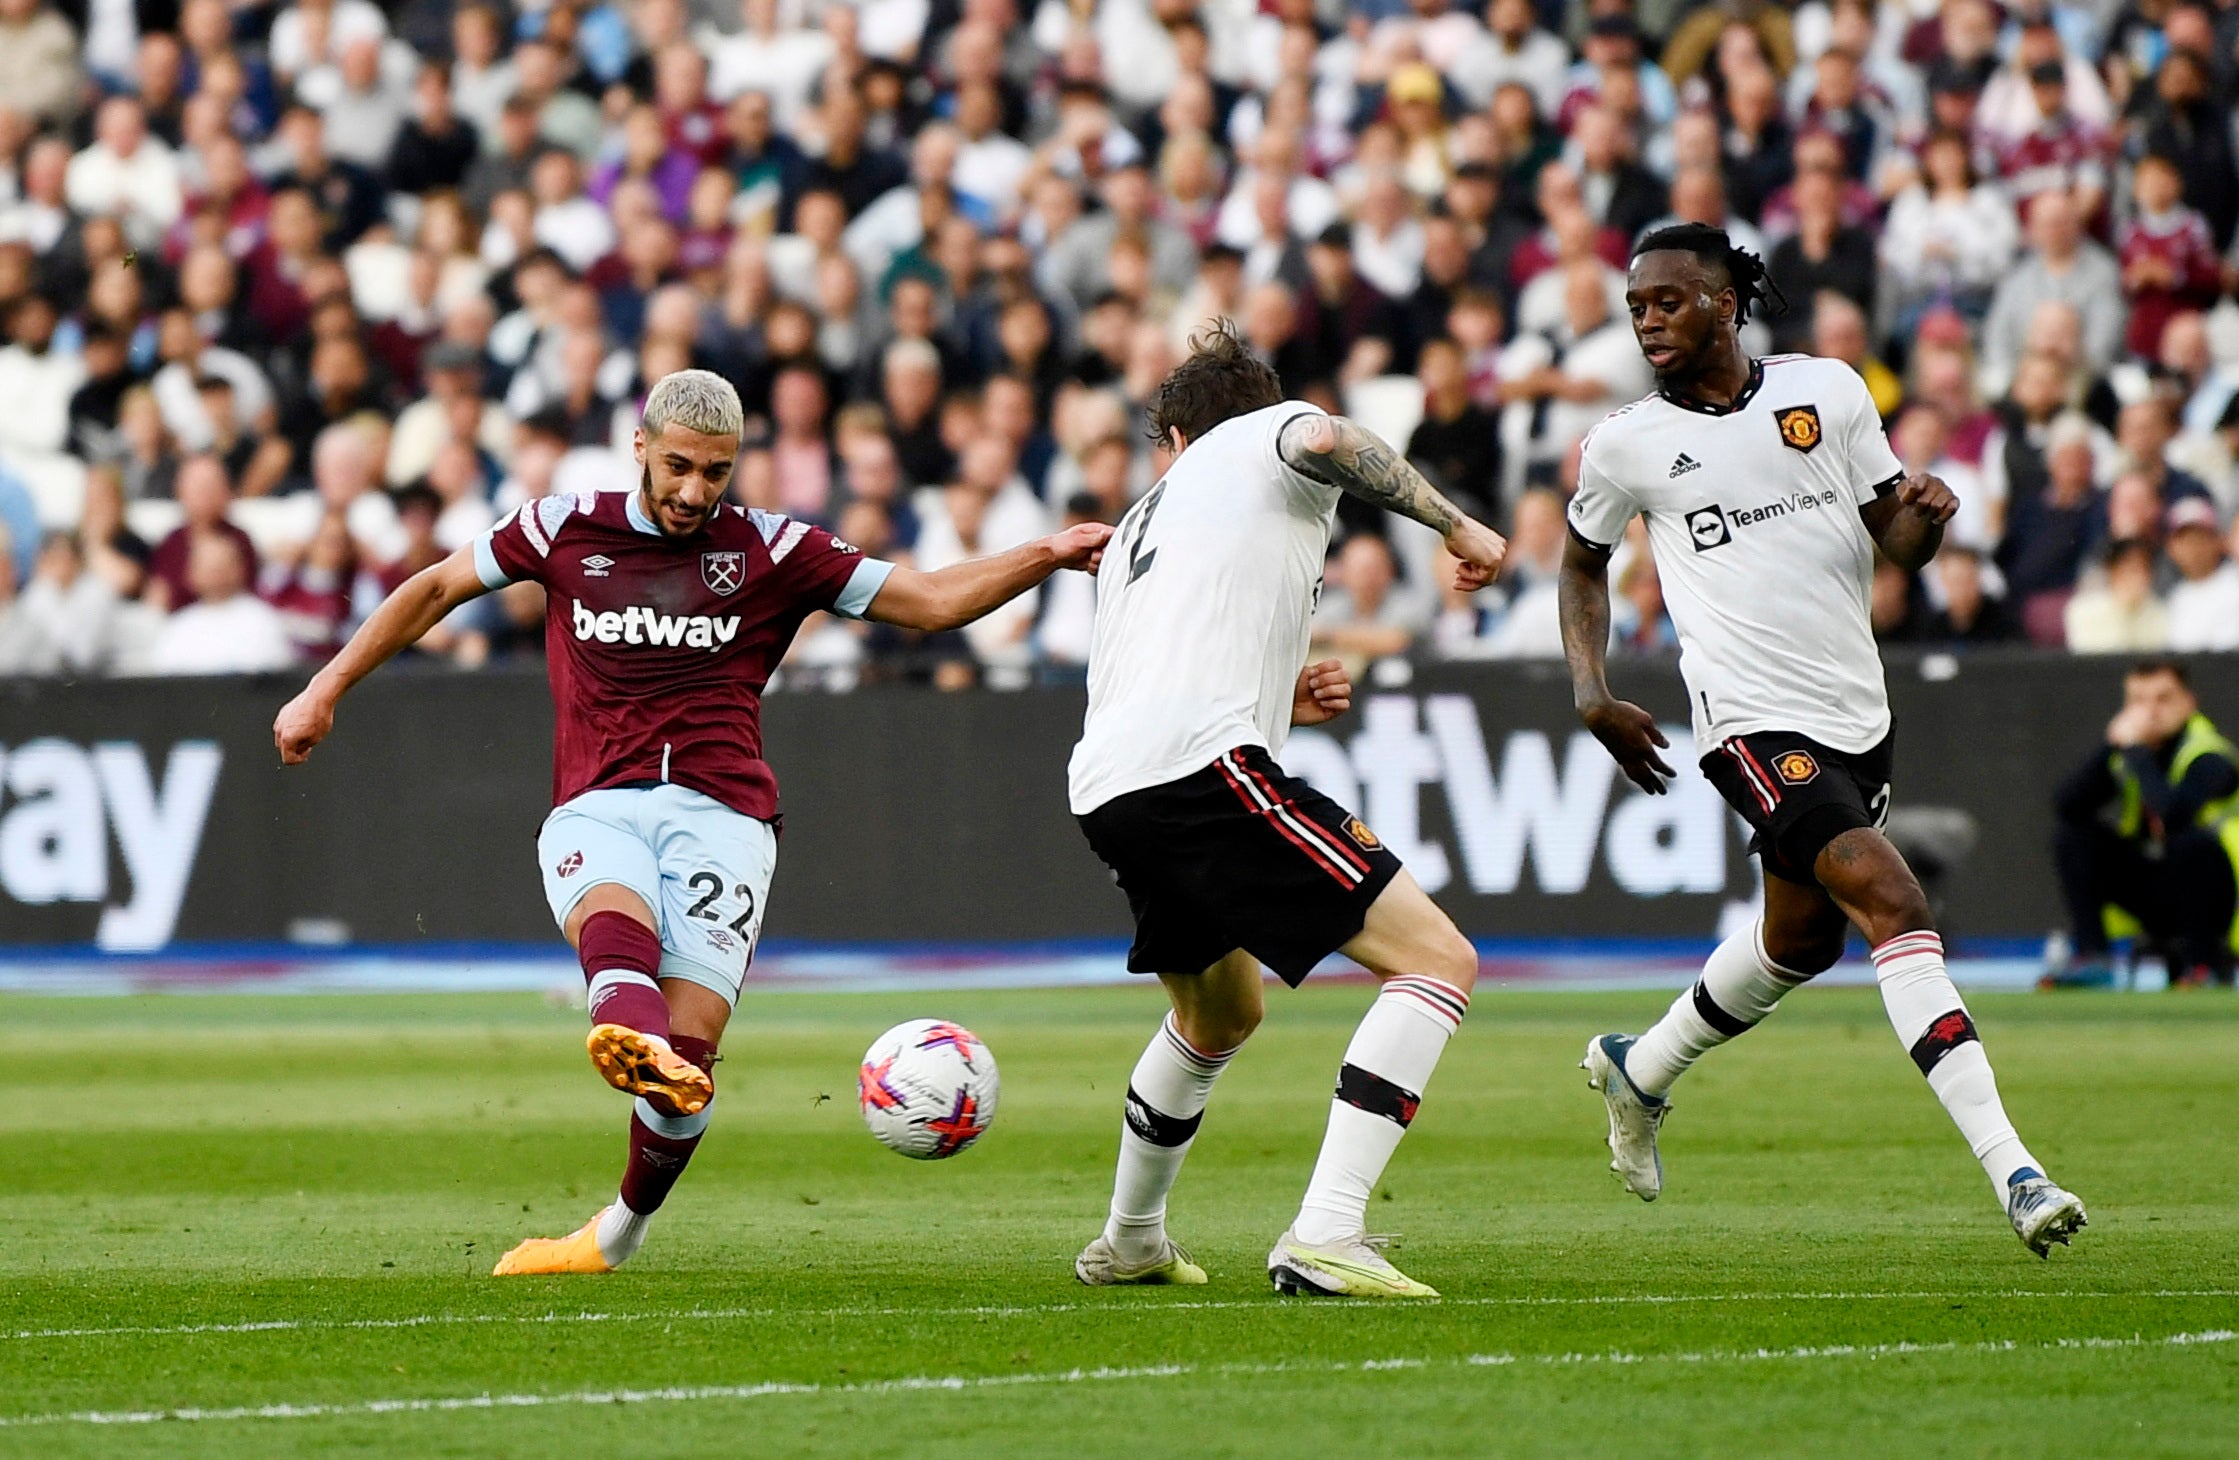 Said Benrahma’s goal earned the Hammers a much-needed three points